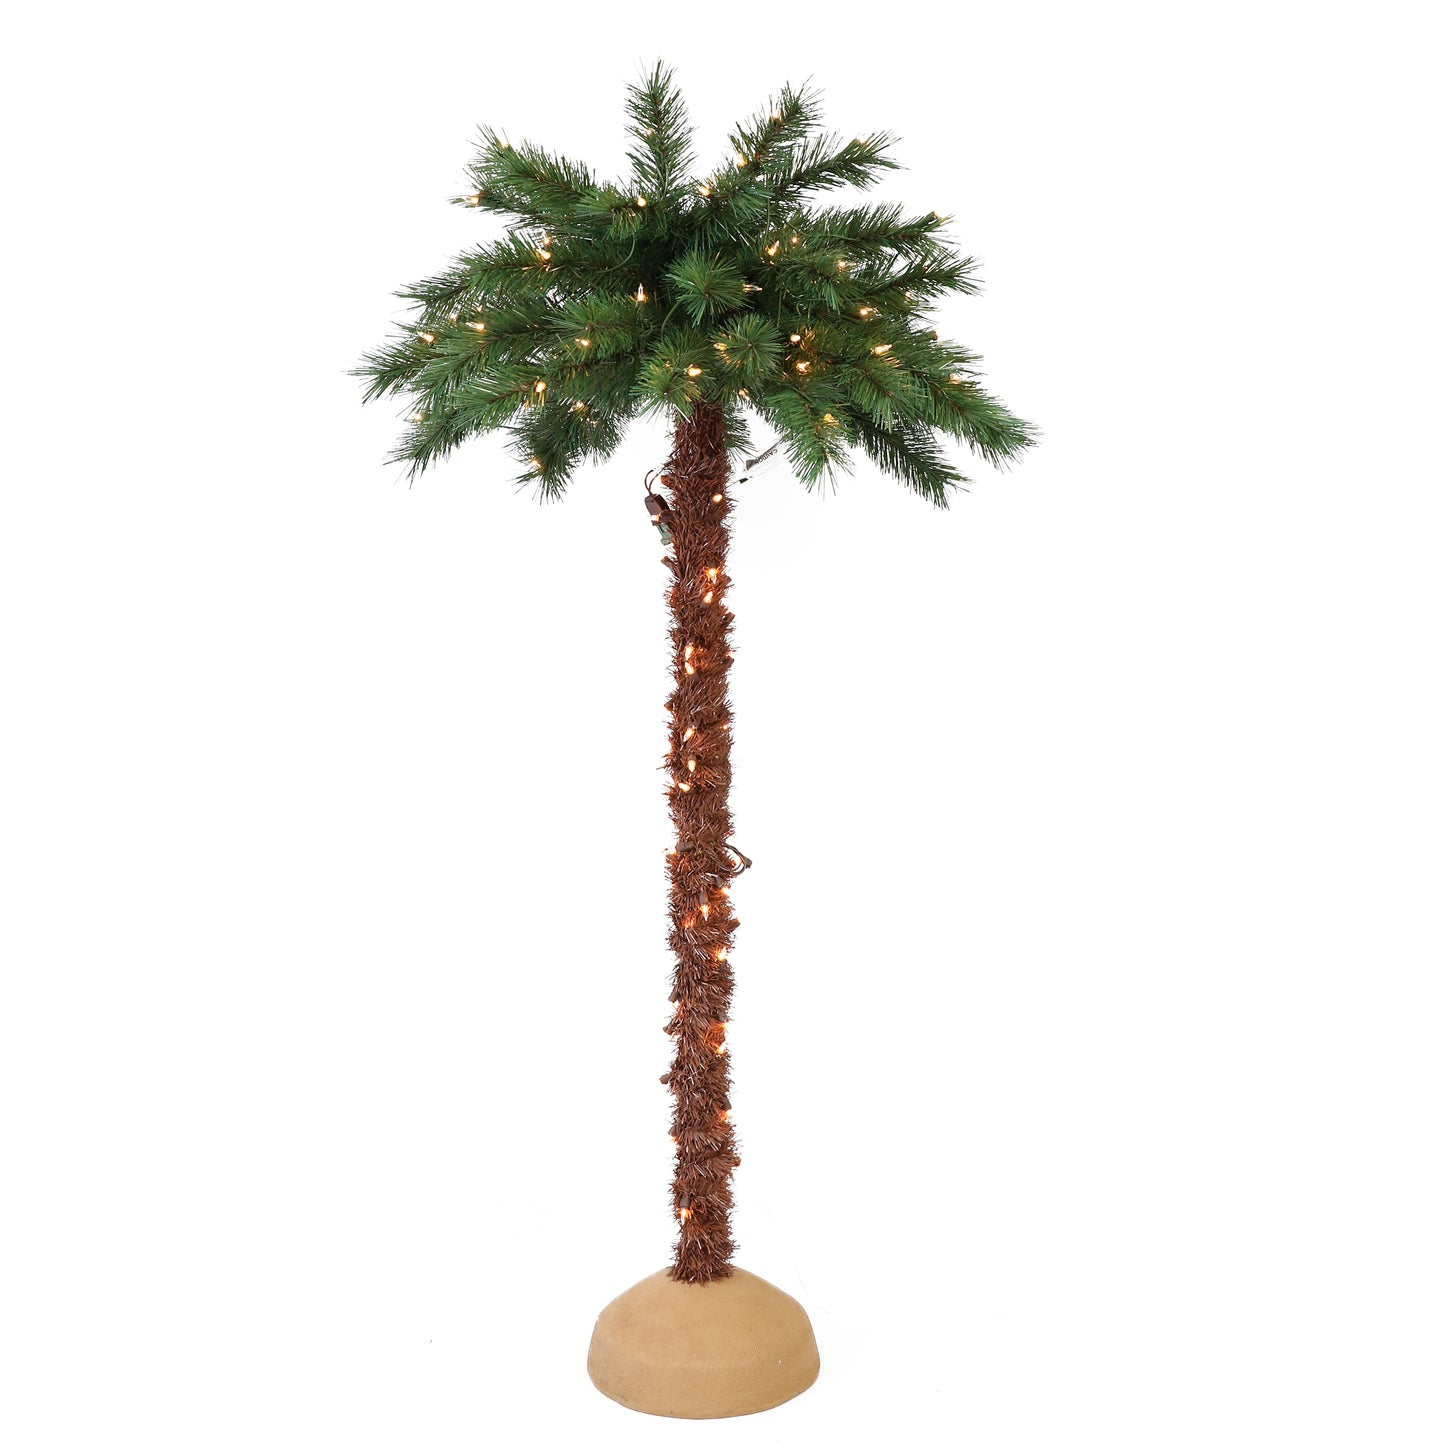 6' Pre-Lit Artificial Palm Tree with 150 UL-Listed Lights